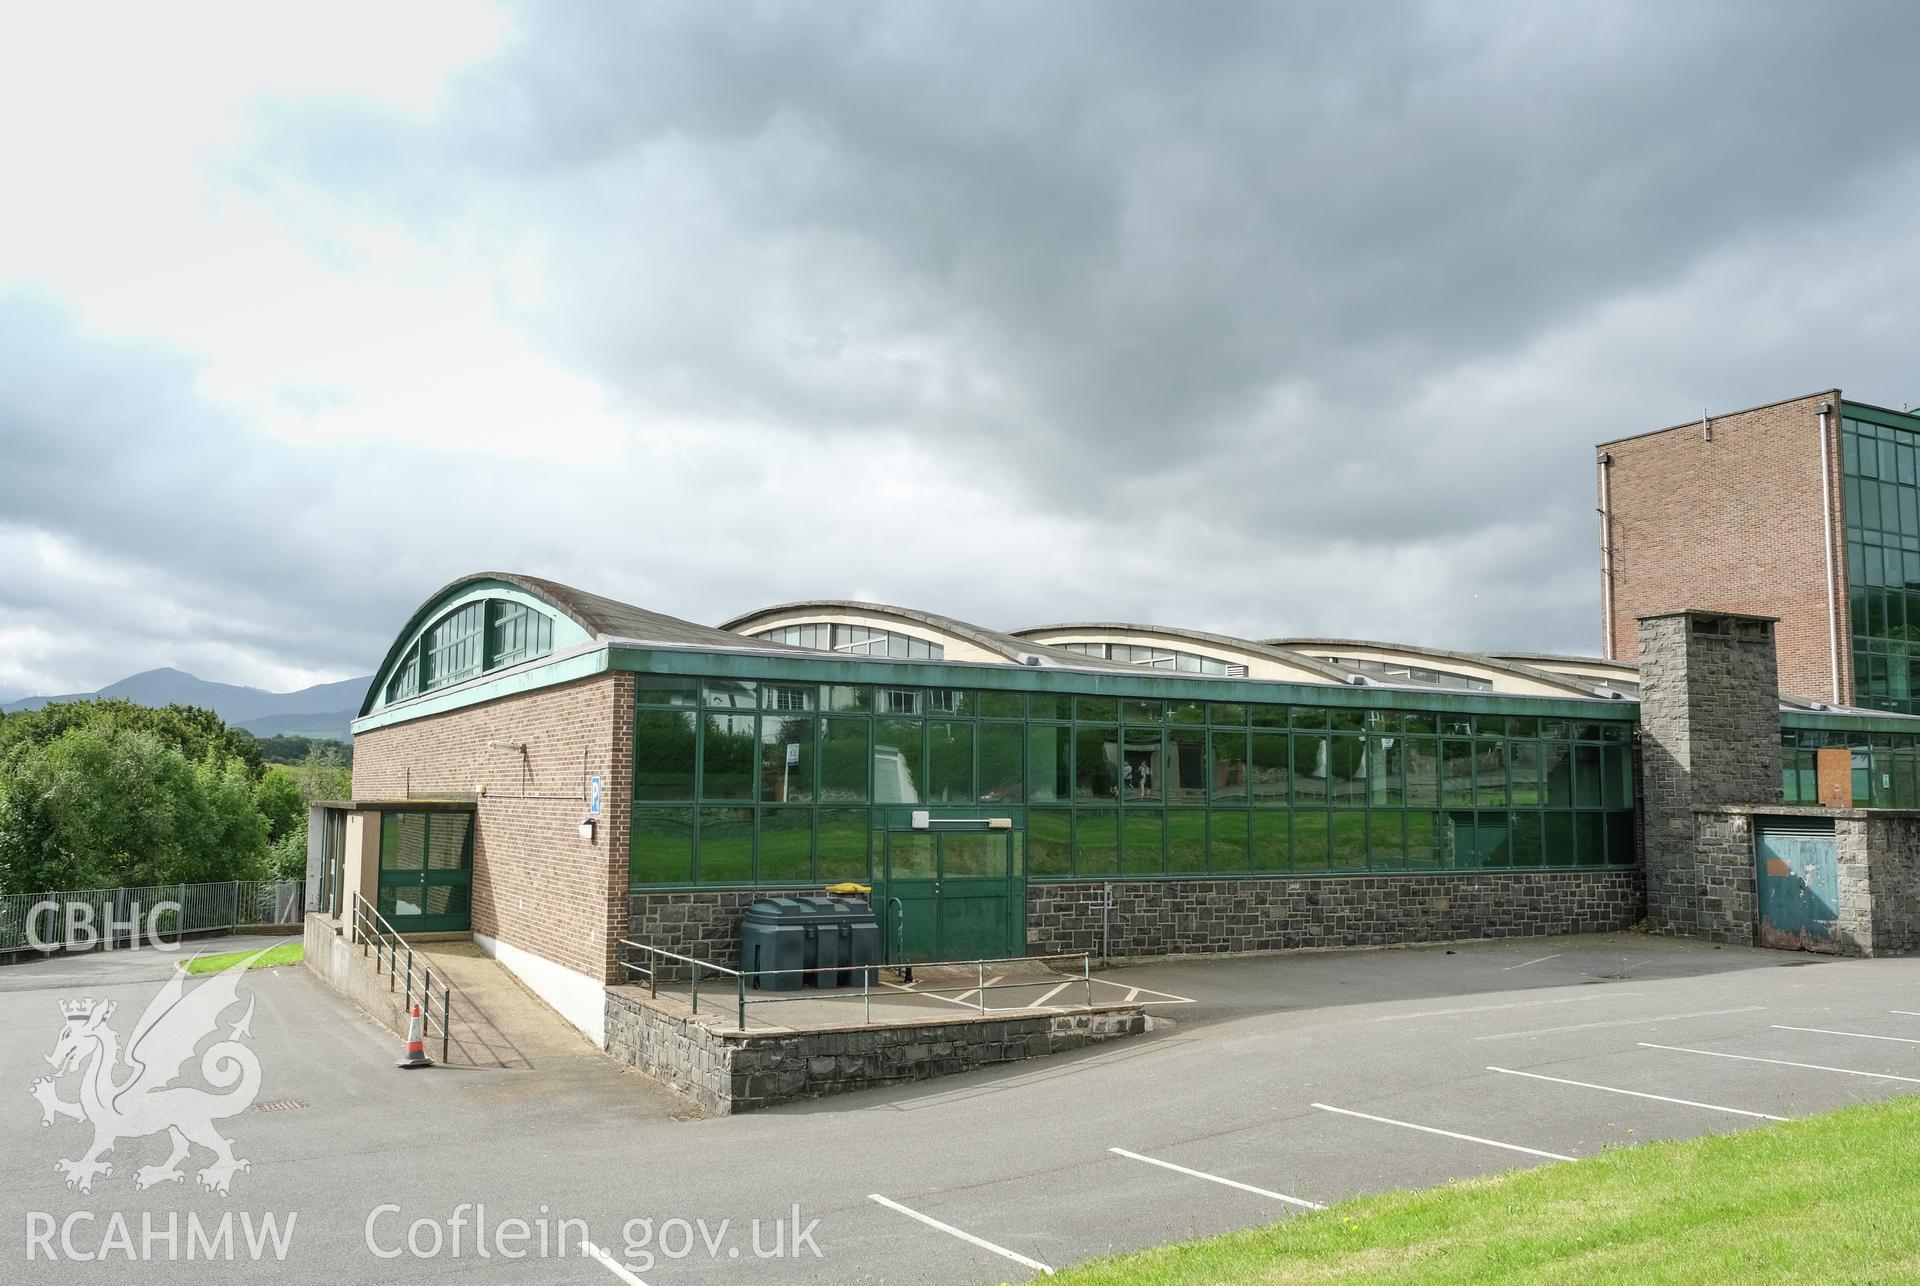 Digital colour photograph showing exterior view of Caernarfonshire Technical College, Ffriddoedd Road, Bangor. Photographed by Dilys Morgan and donated by Wyn Thomas of Grwp Llandrillo-Menai Further Education College, 2019.